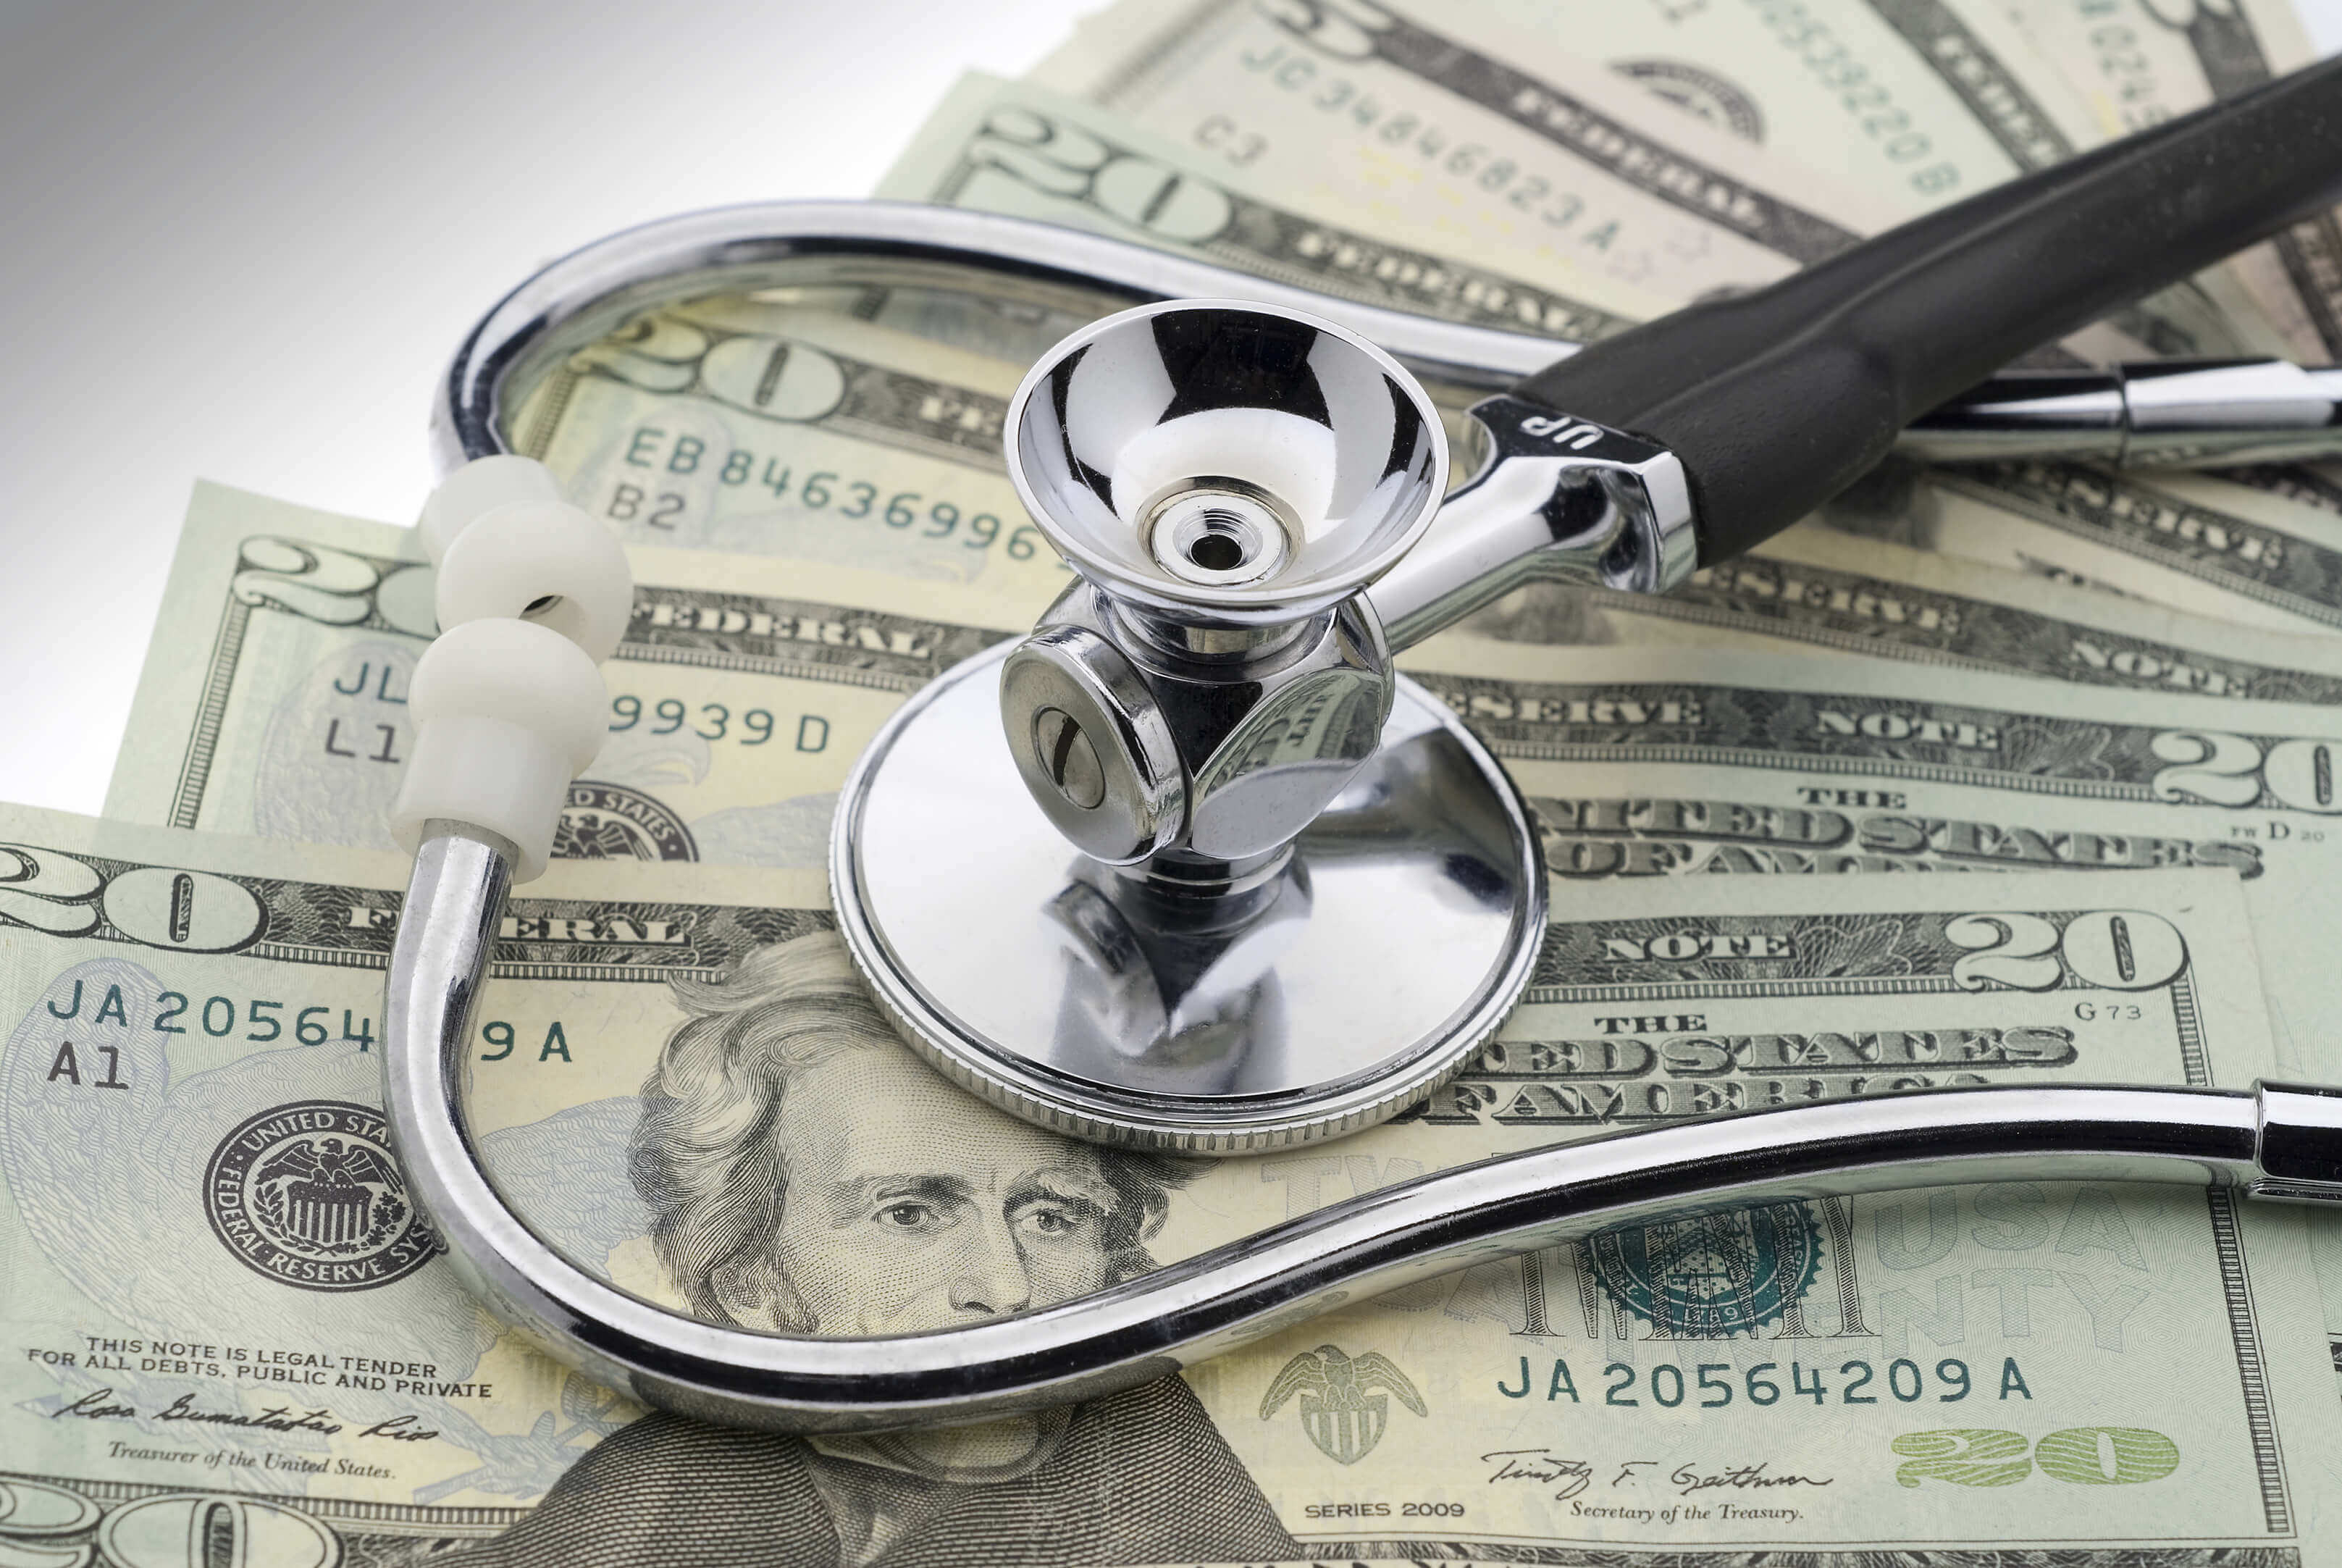 Image of a stethoscope on top of a stack of cash.